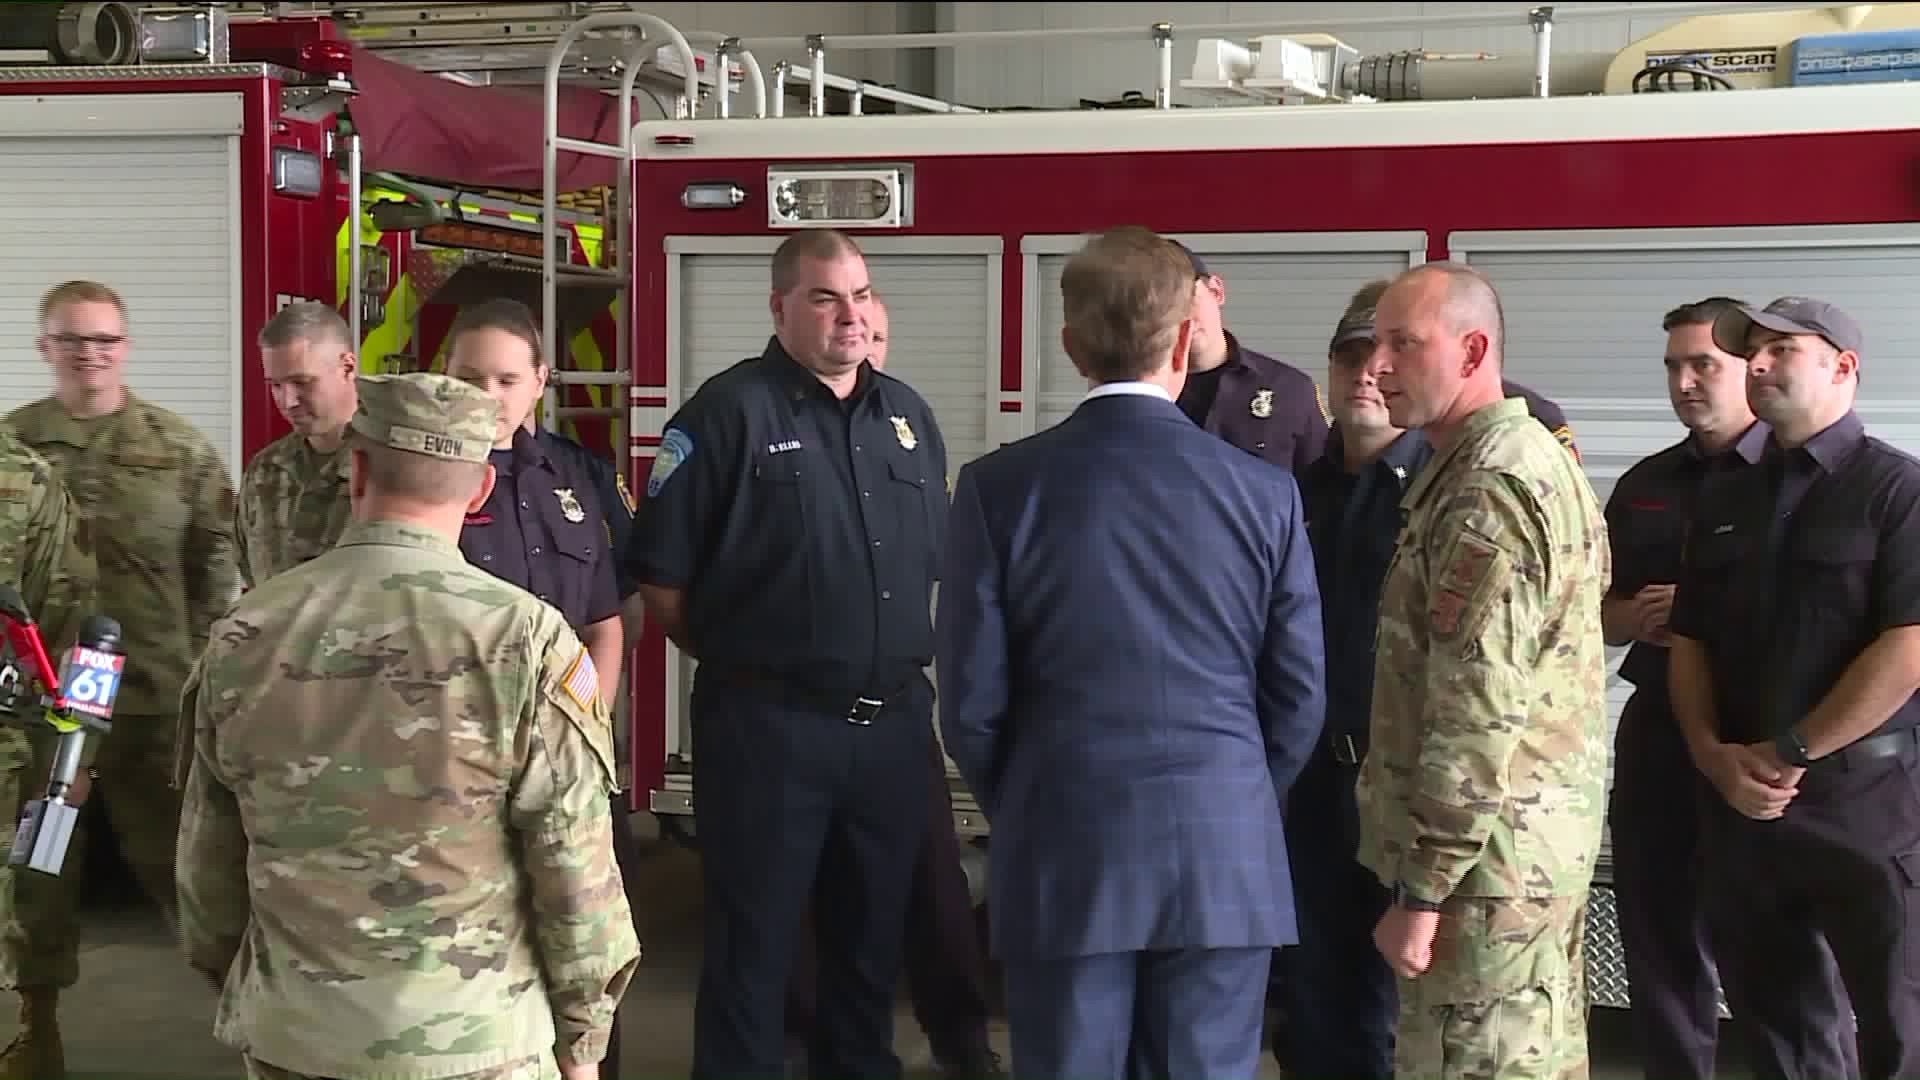 Lamont meets with National Guard members who helped during B17 plane crash